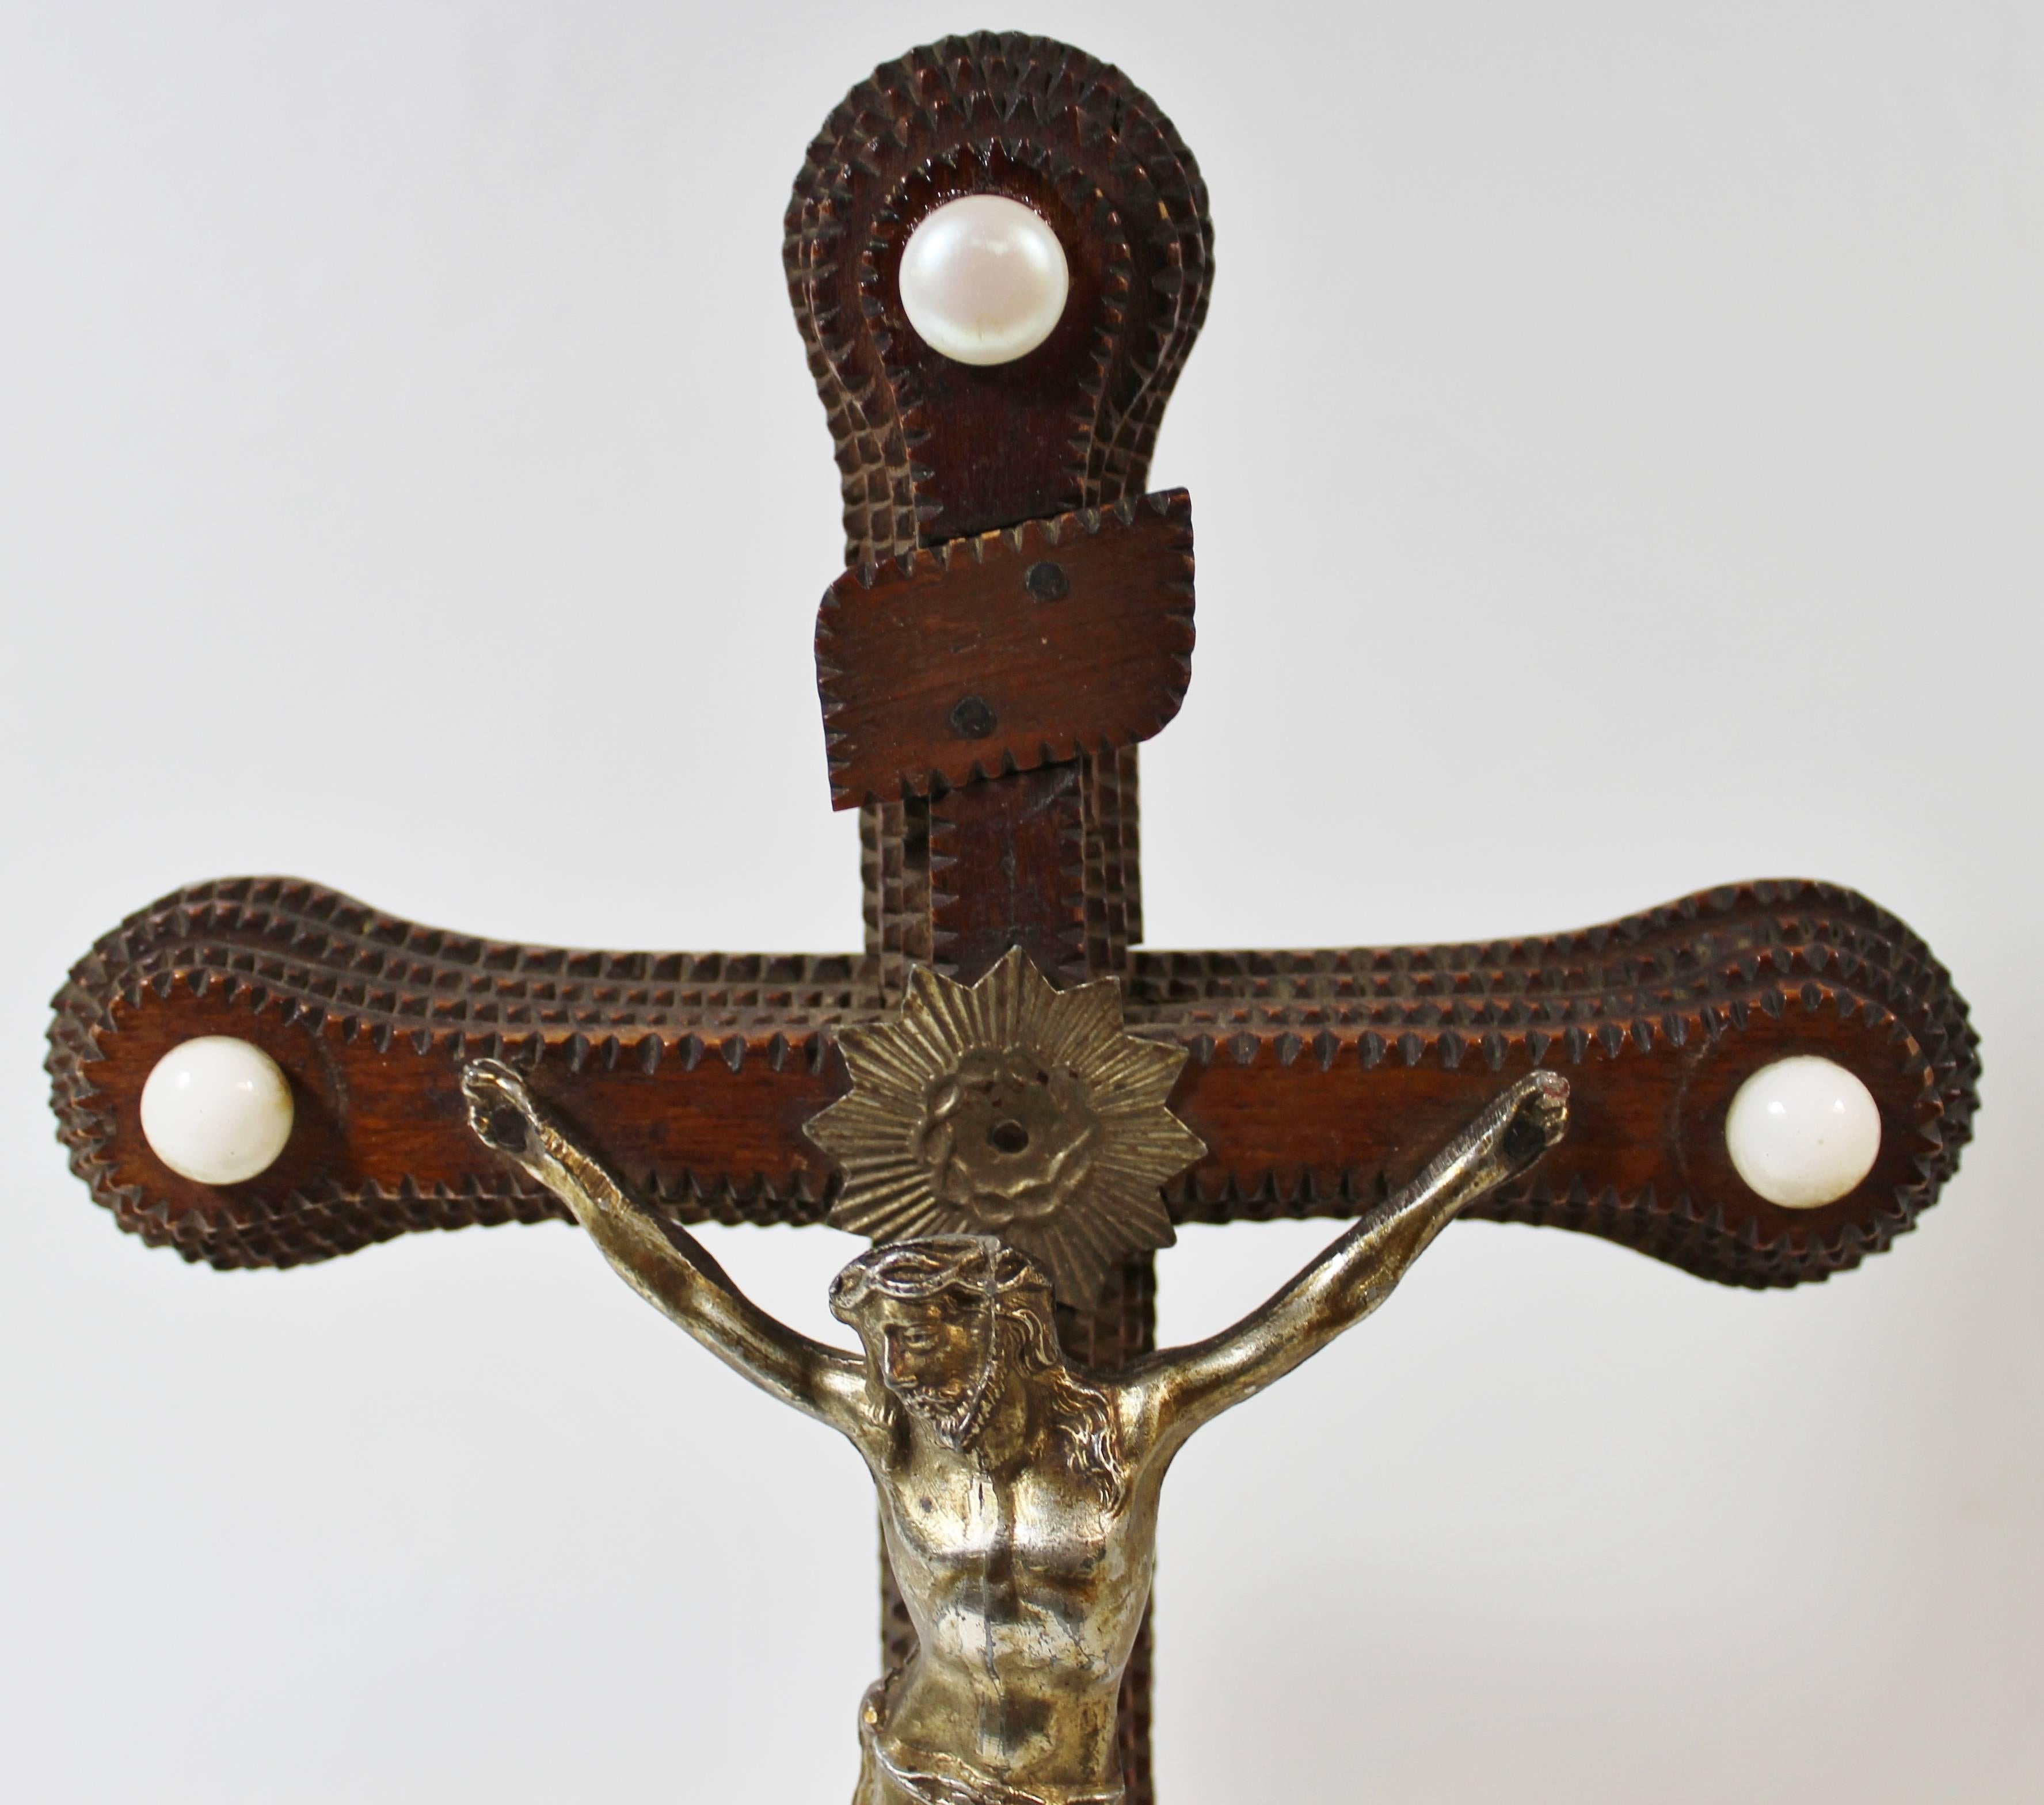 Tramp Art crucifix.

Free shipping within the United States and Canada.